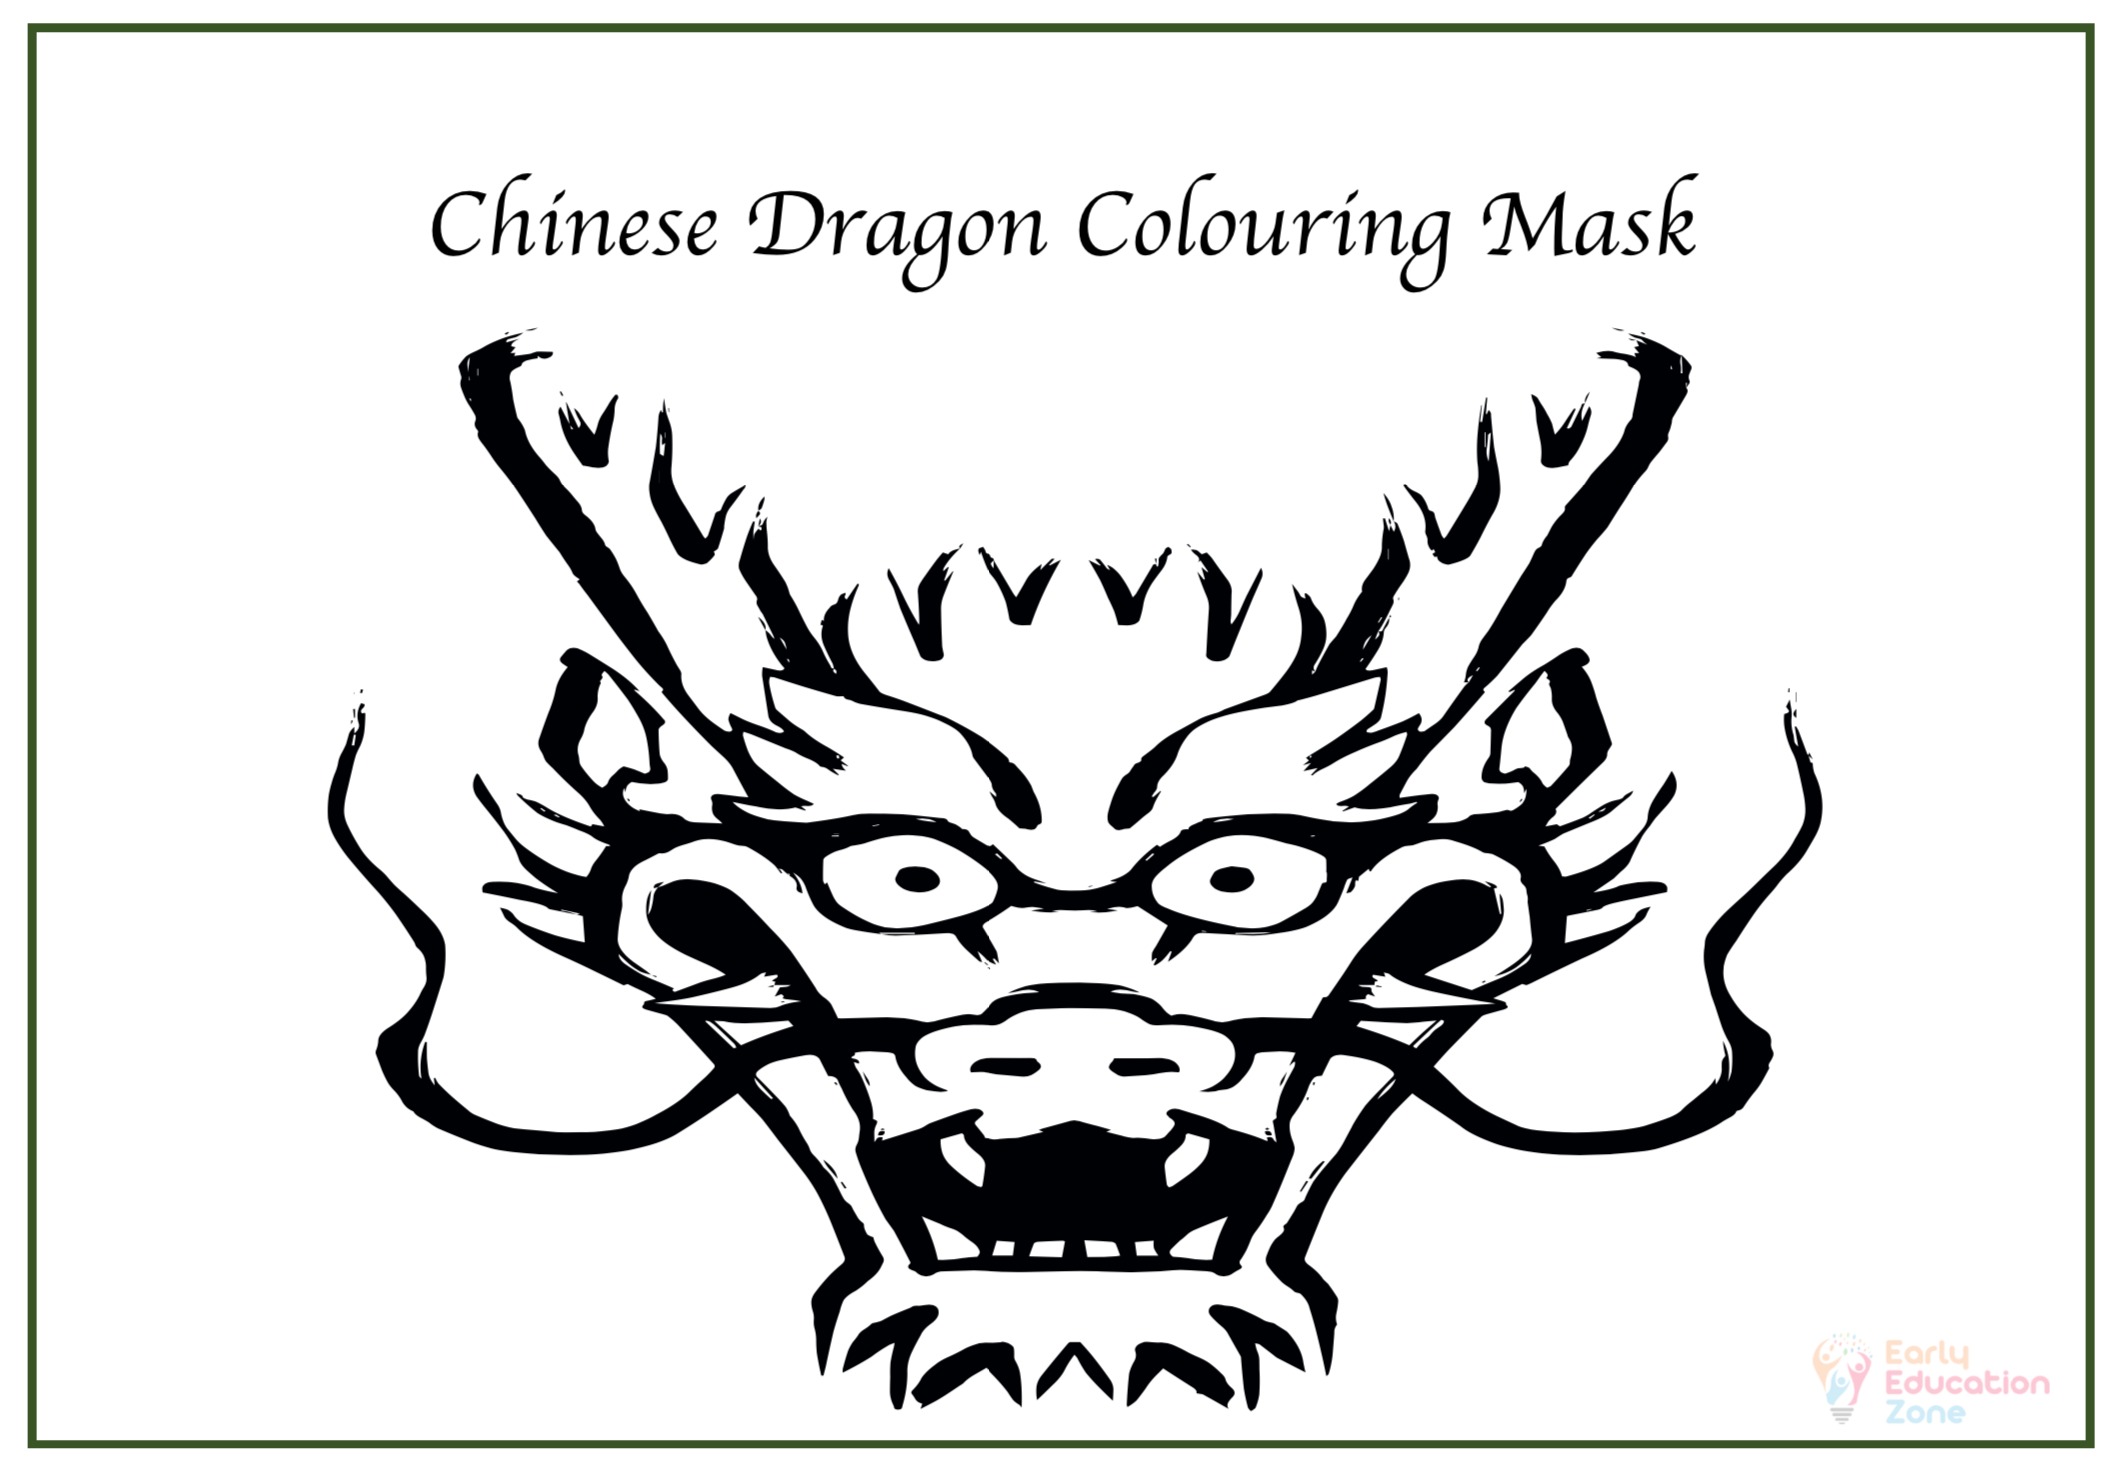 Chinese Dragon Colouring Mask 2 